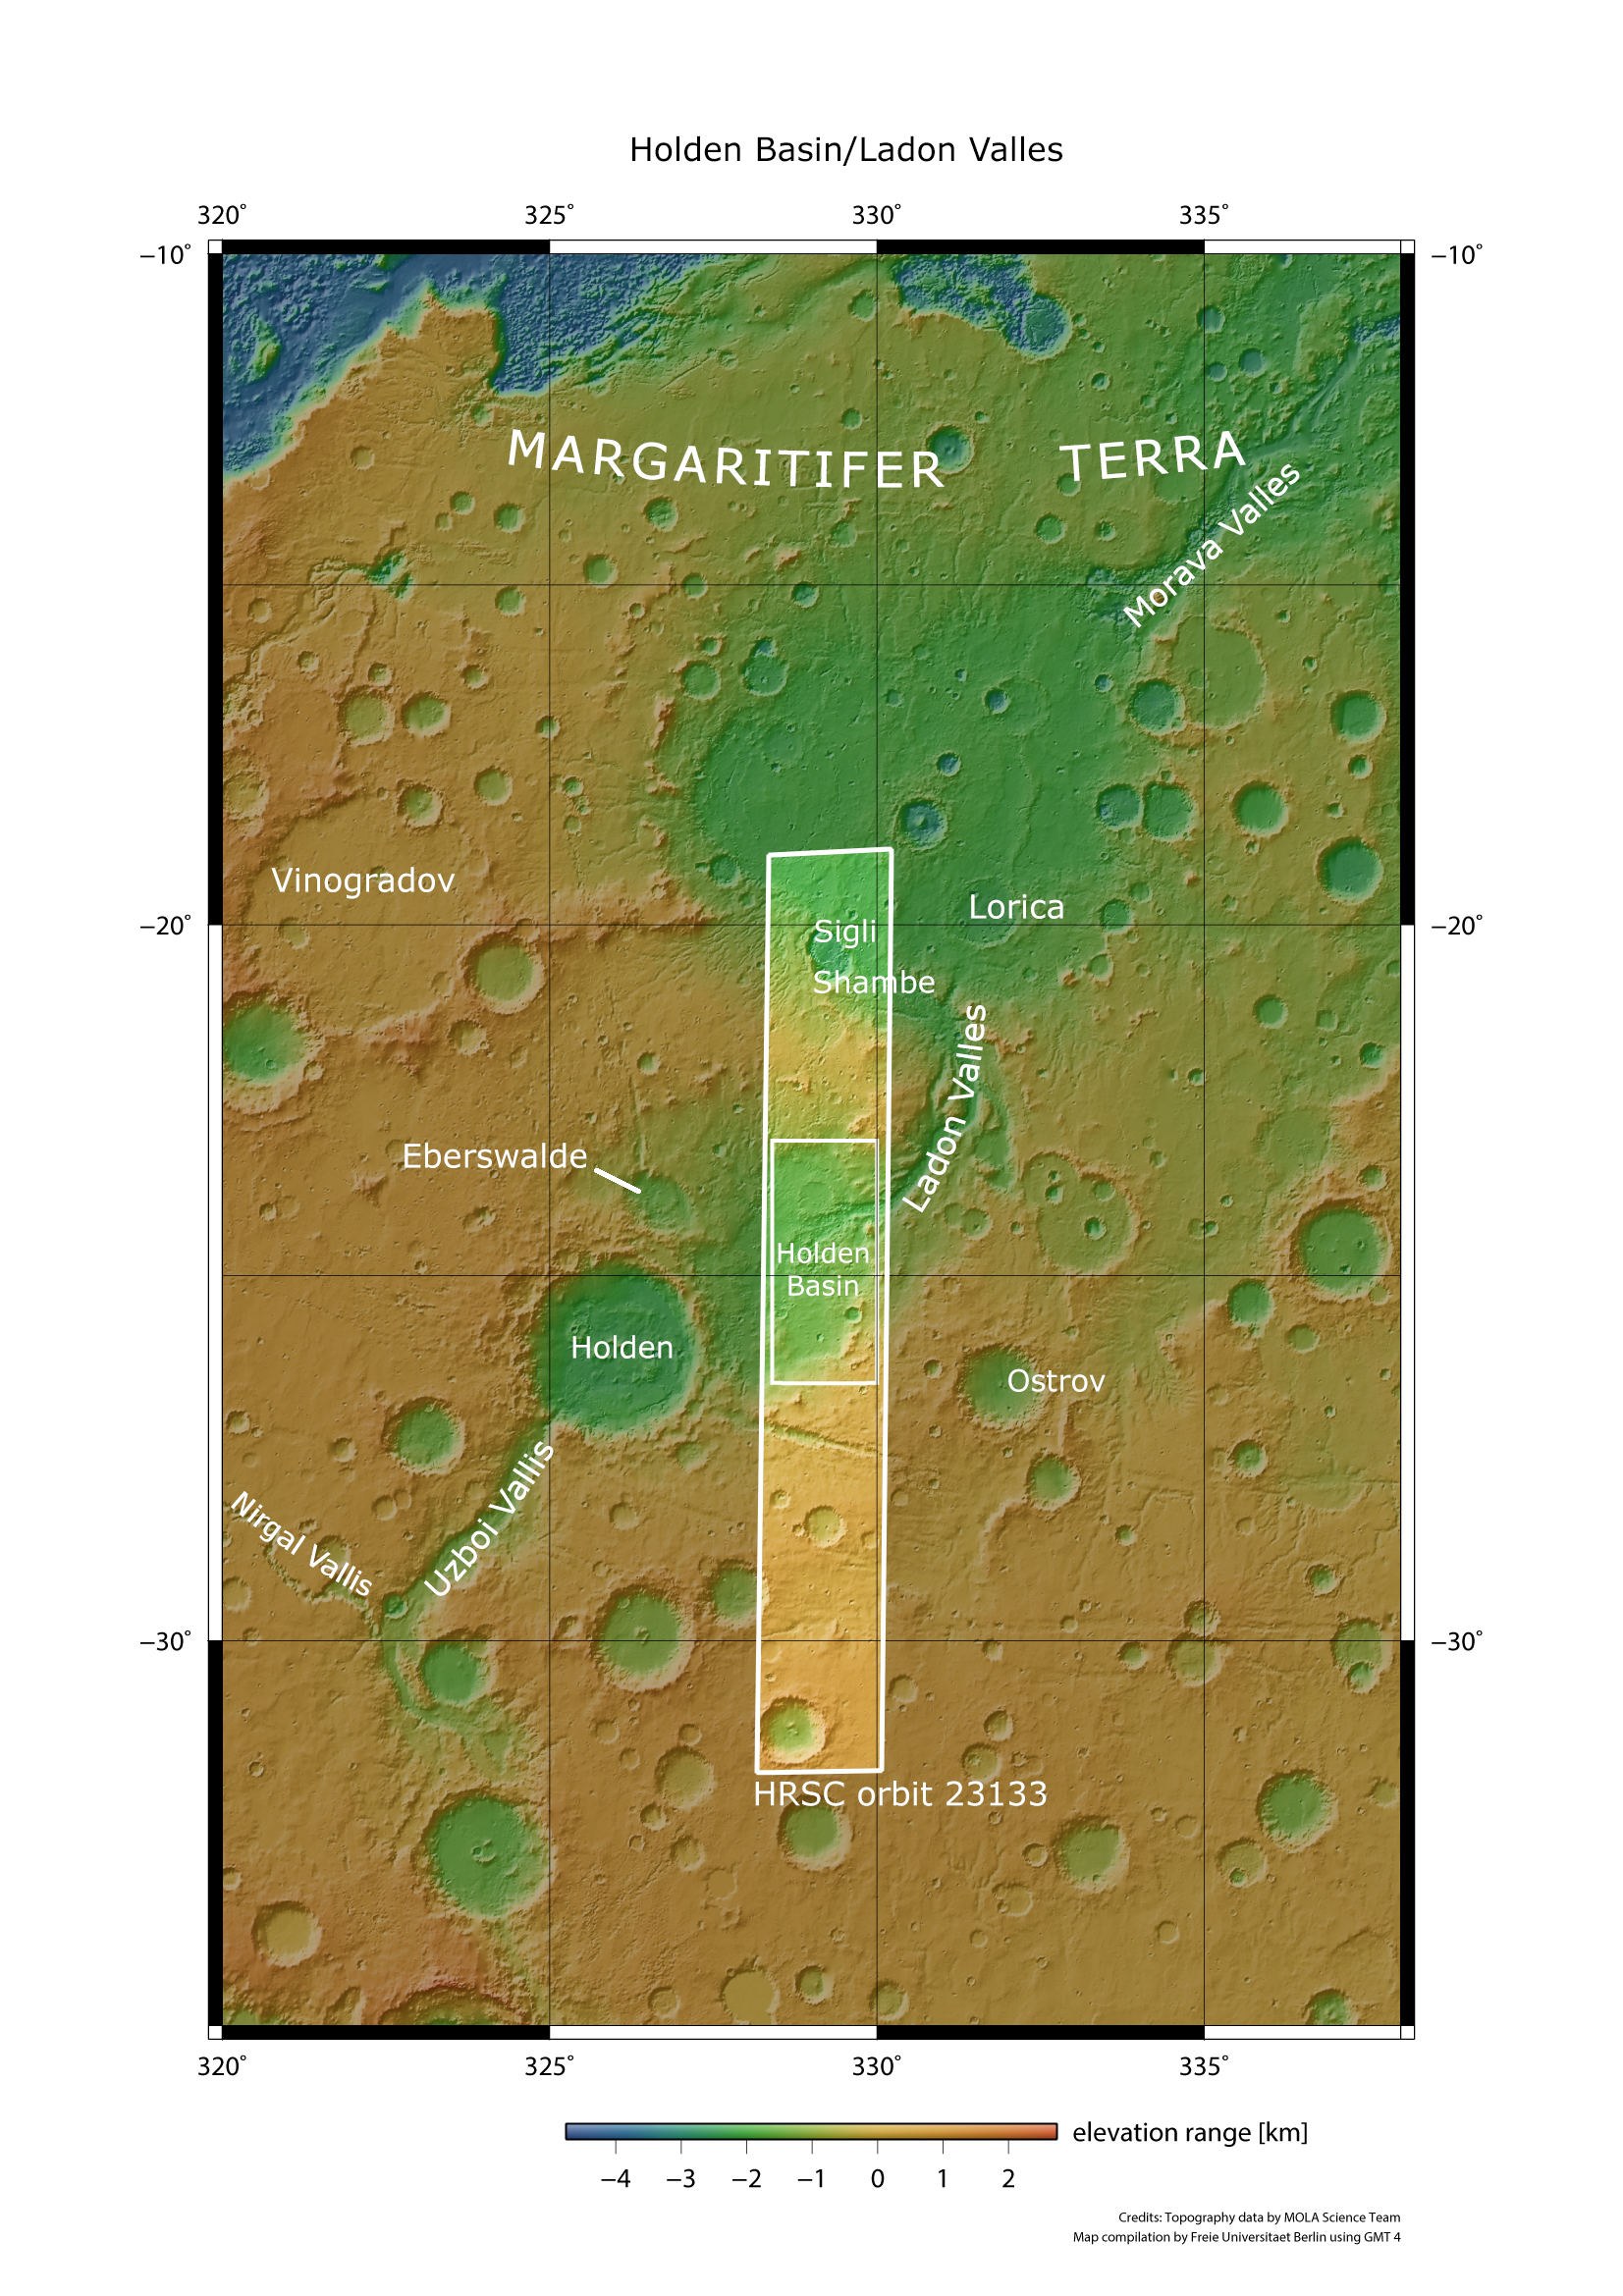 Location of the Uzboi-Ladon-Morava system in the southern highlands of Mars